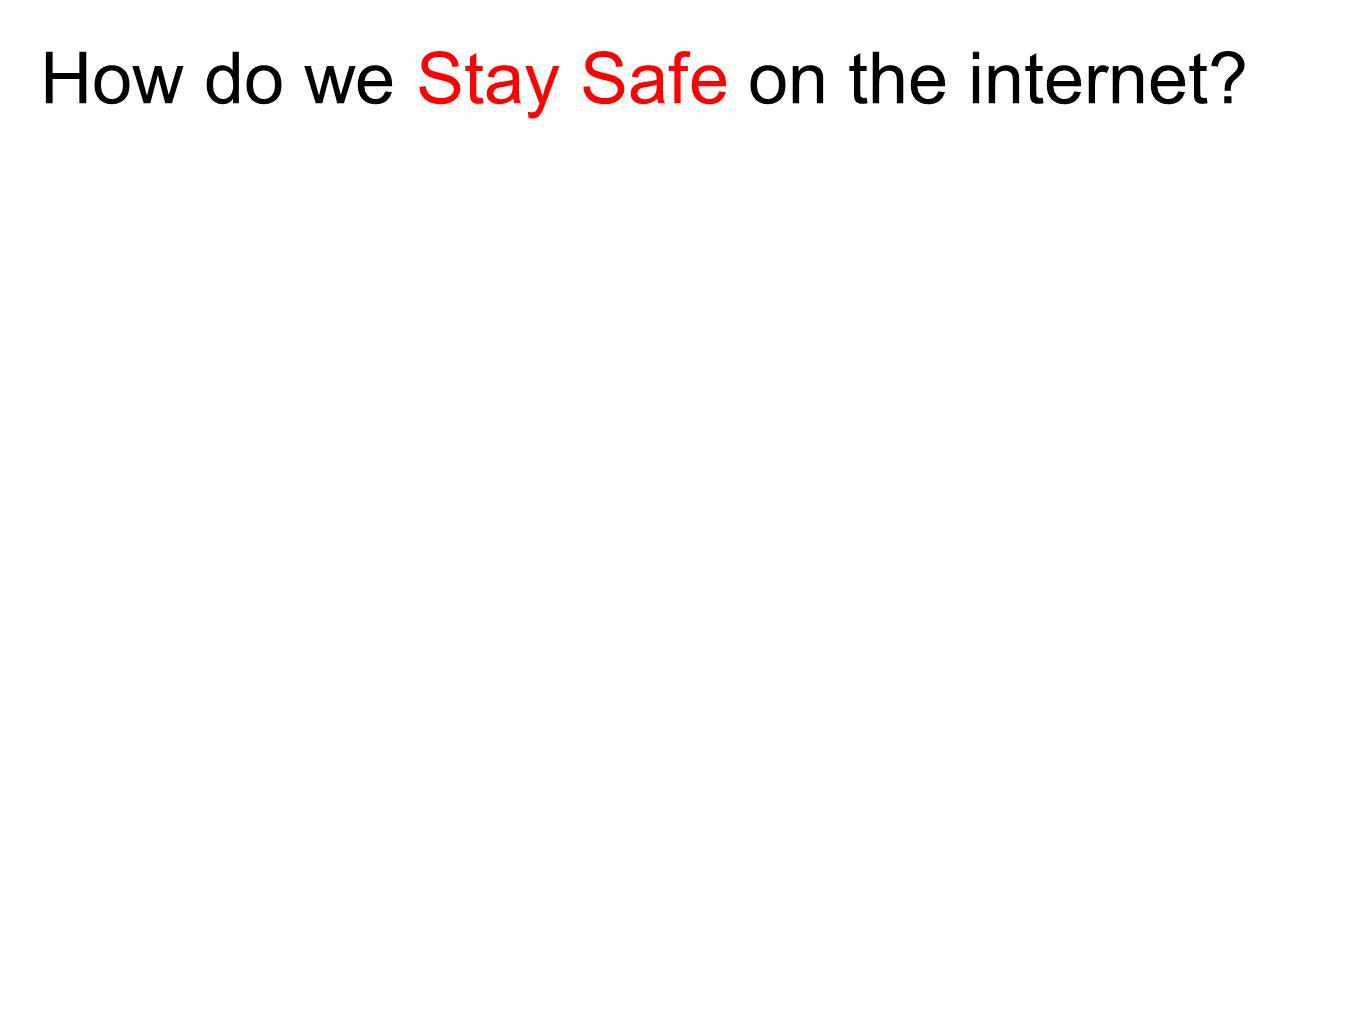 How do we Stay Safe on the internet